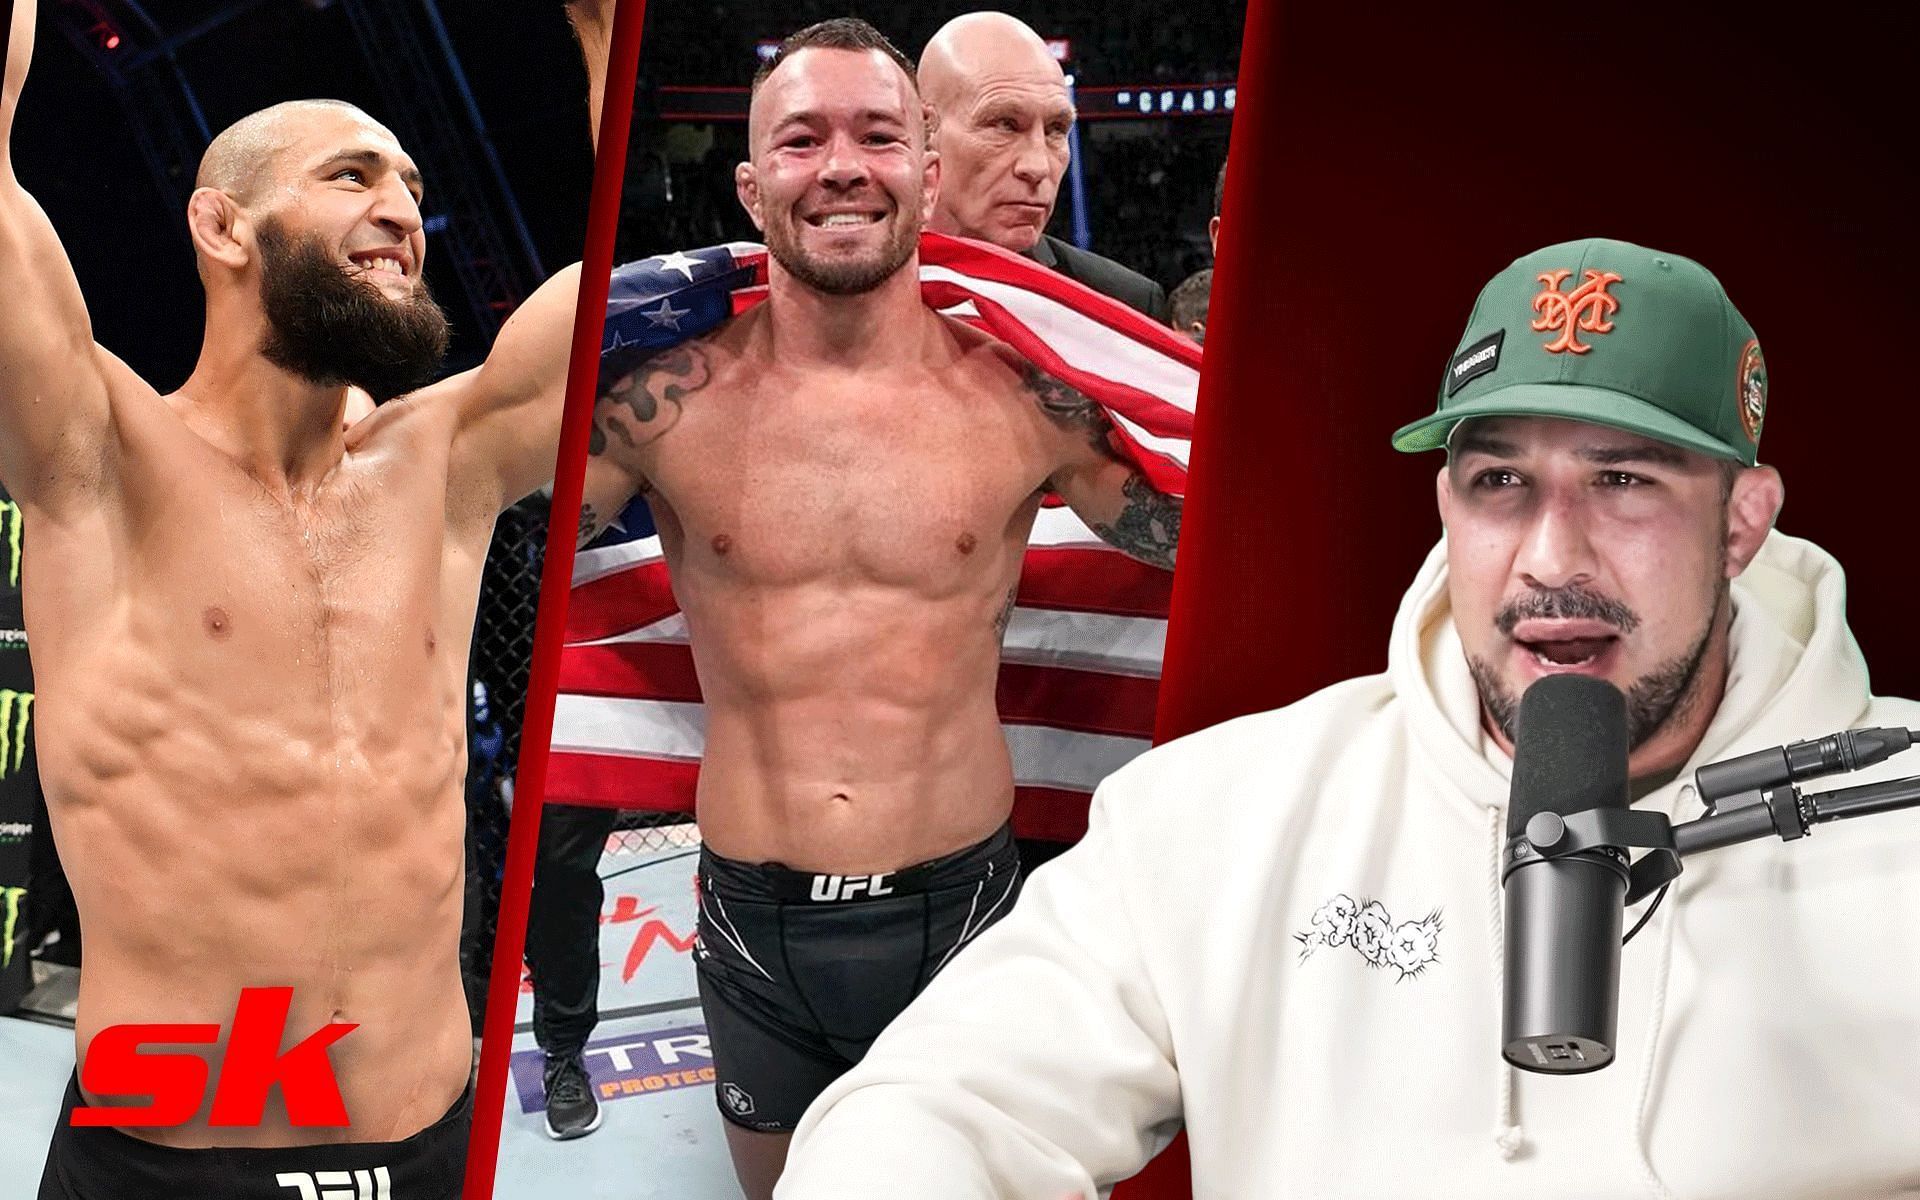 Khamzat Chimaev (left), Colby Covington (middle) and Brendan Schaub (right)[Images courtesy: @colbycovmma on Instagram, @thiccboy on YouTube] 